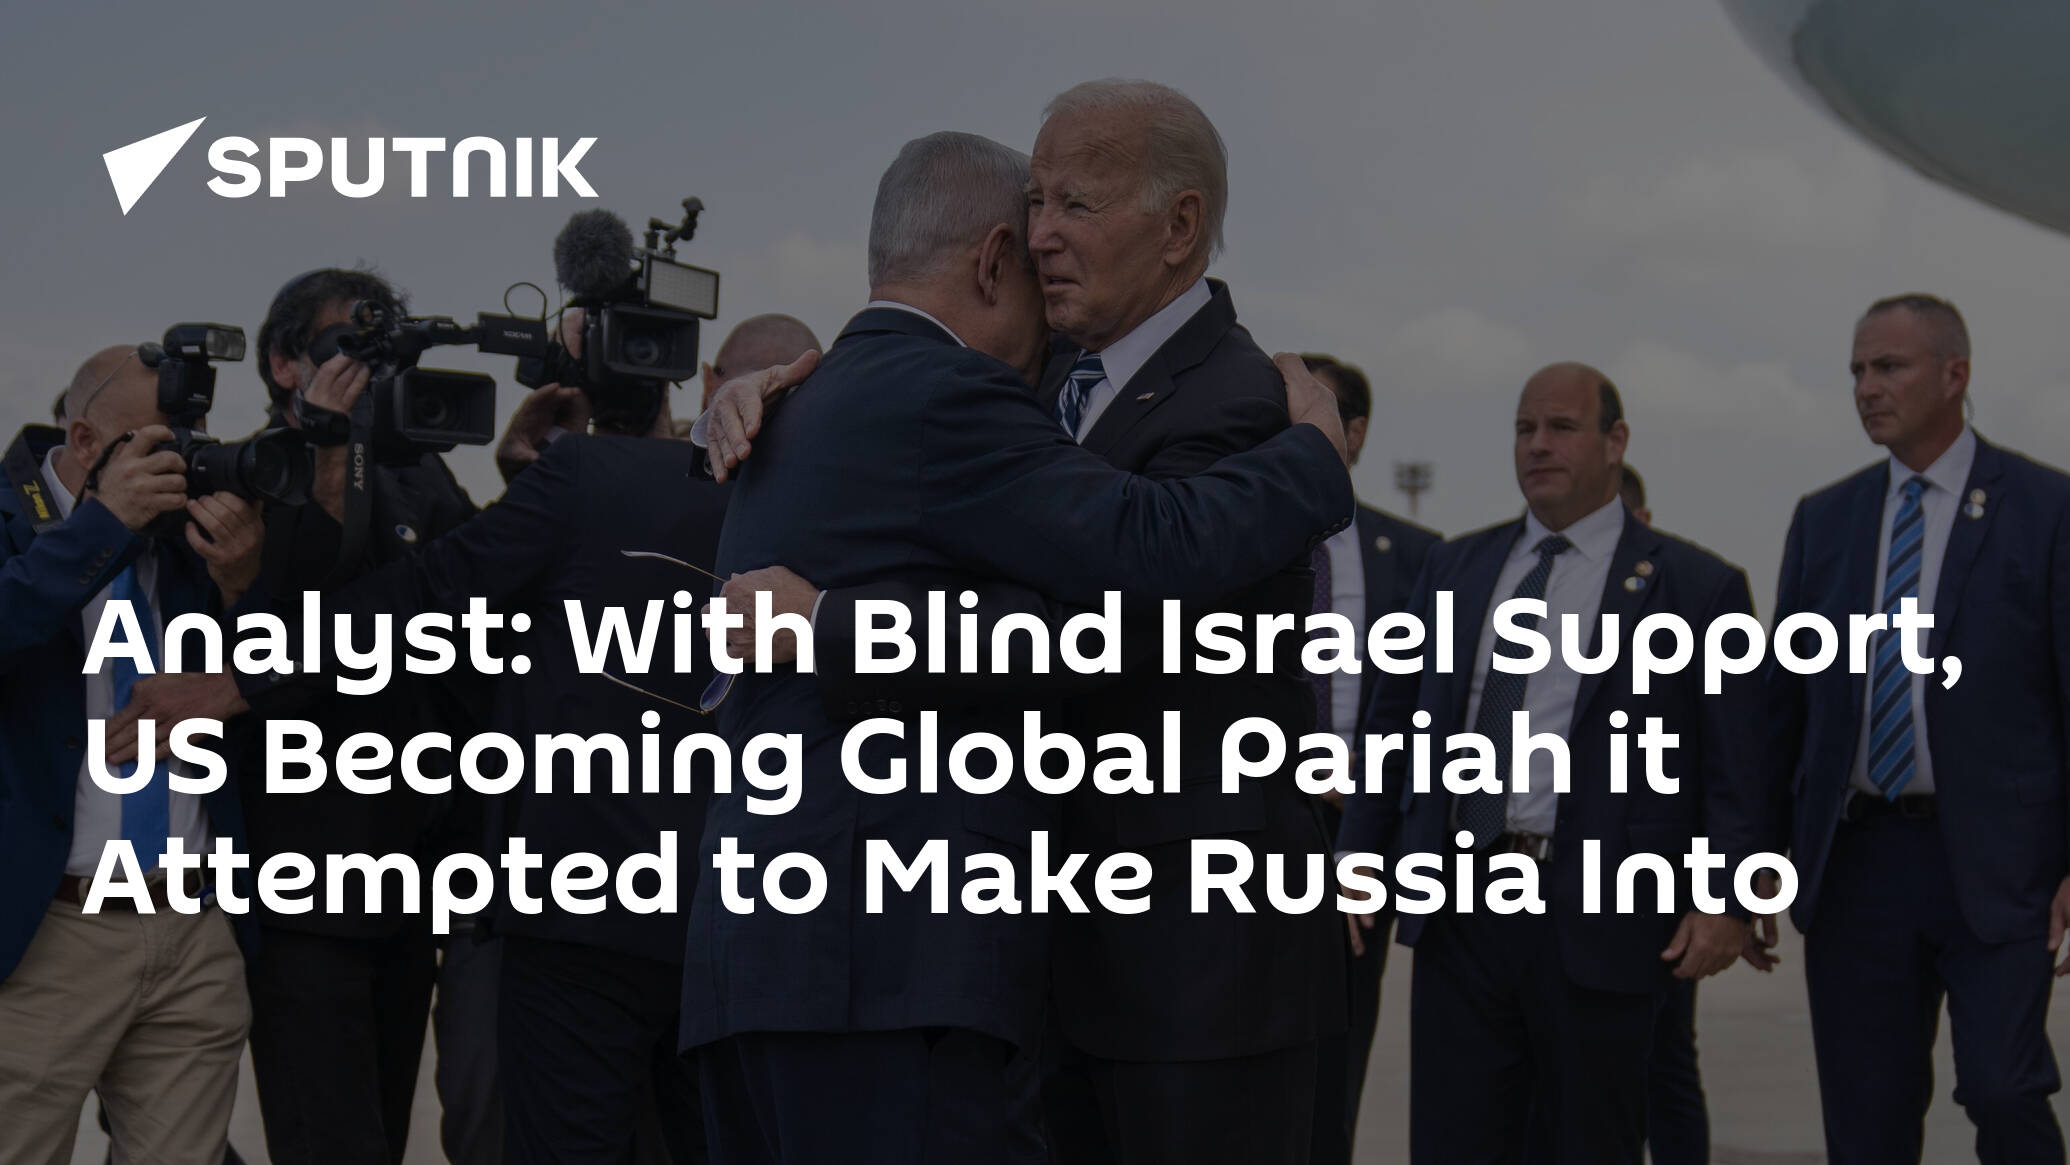 Analyst: With Blind Israel Support, US Becoming Global Pariah it Attempted to Make Russia Into